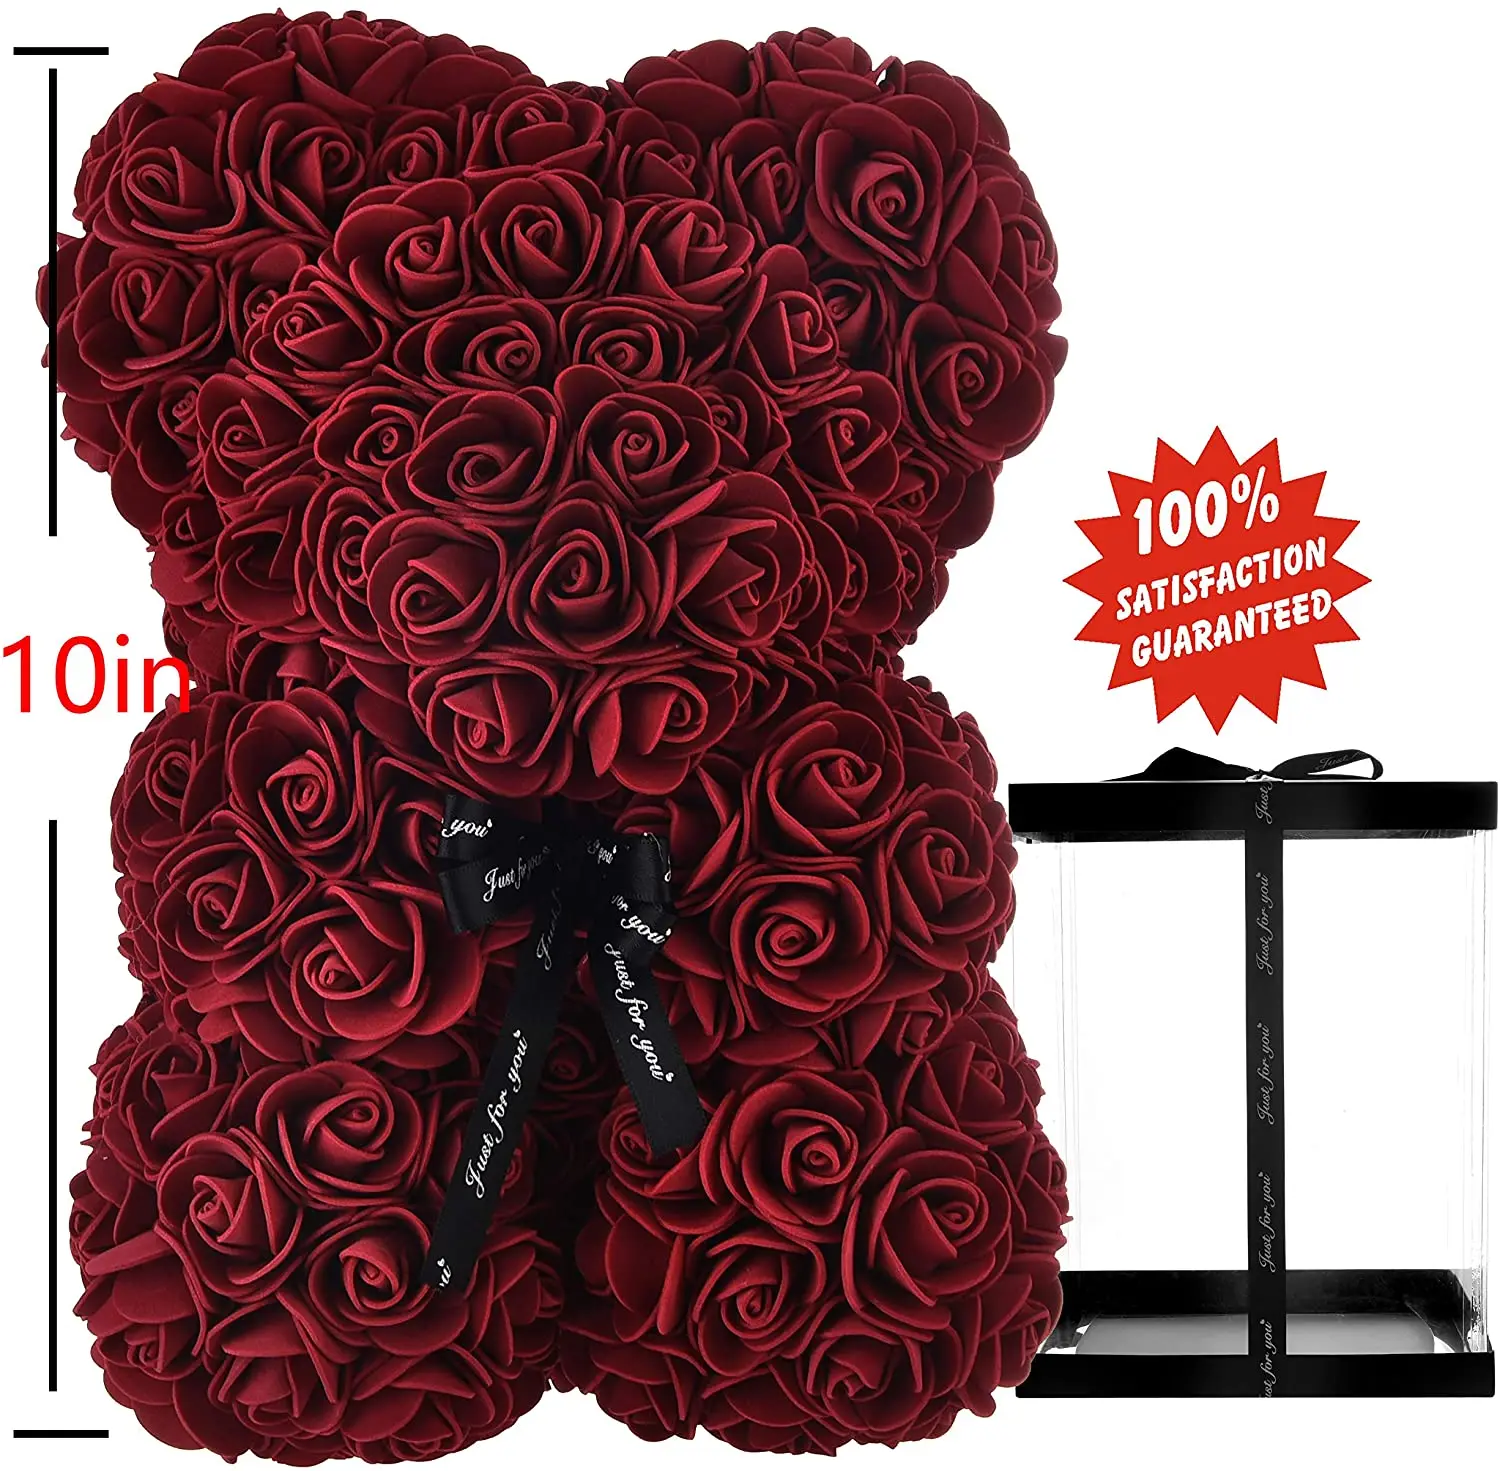 

Hot Sale 25cm Soap Foam Bear of Roses Teddi Bear Rose Flower Artificial New Year Gifts for Women Valentines Gift Christmas